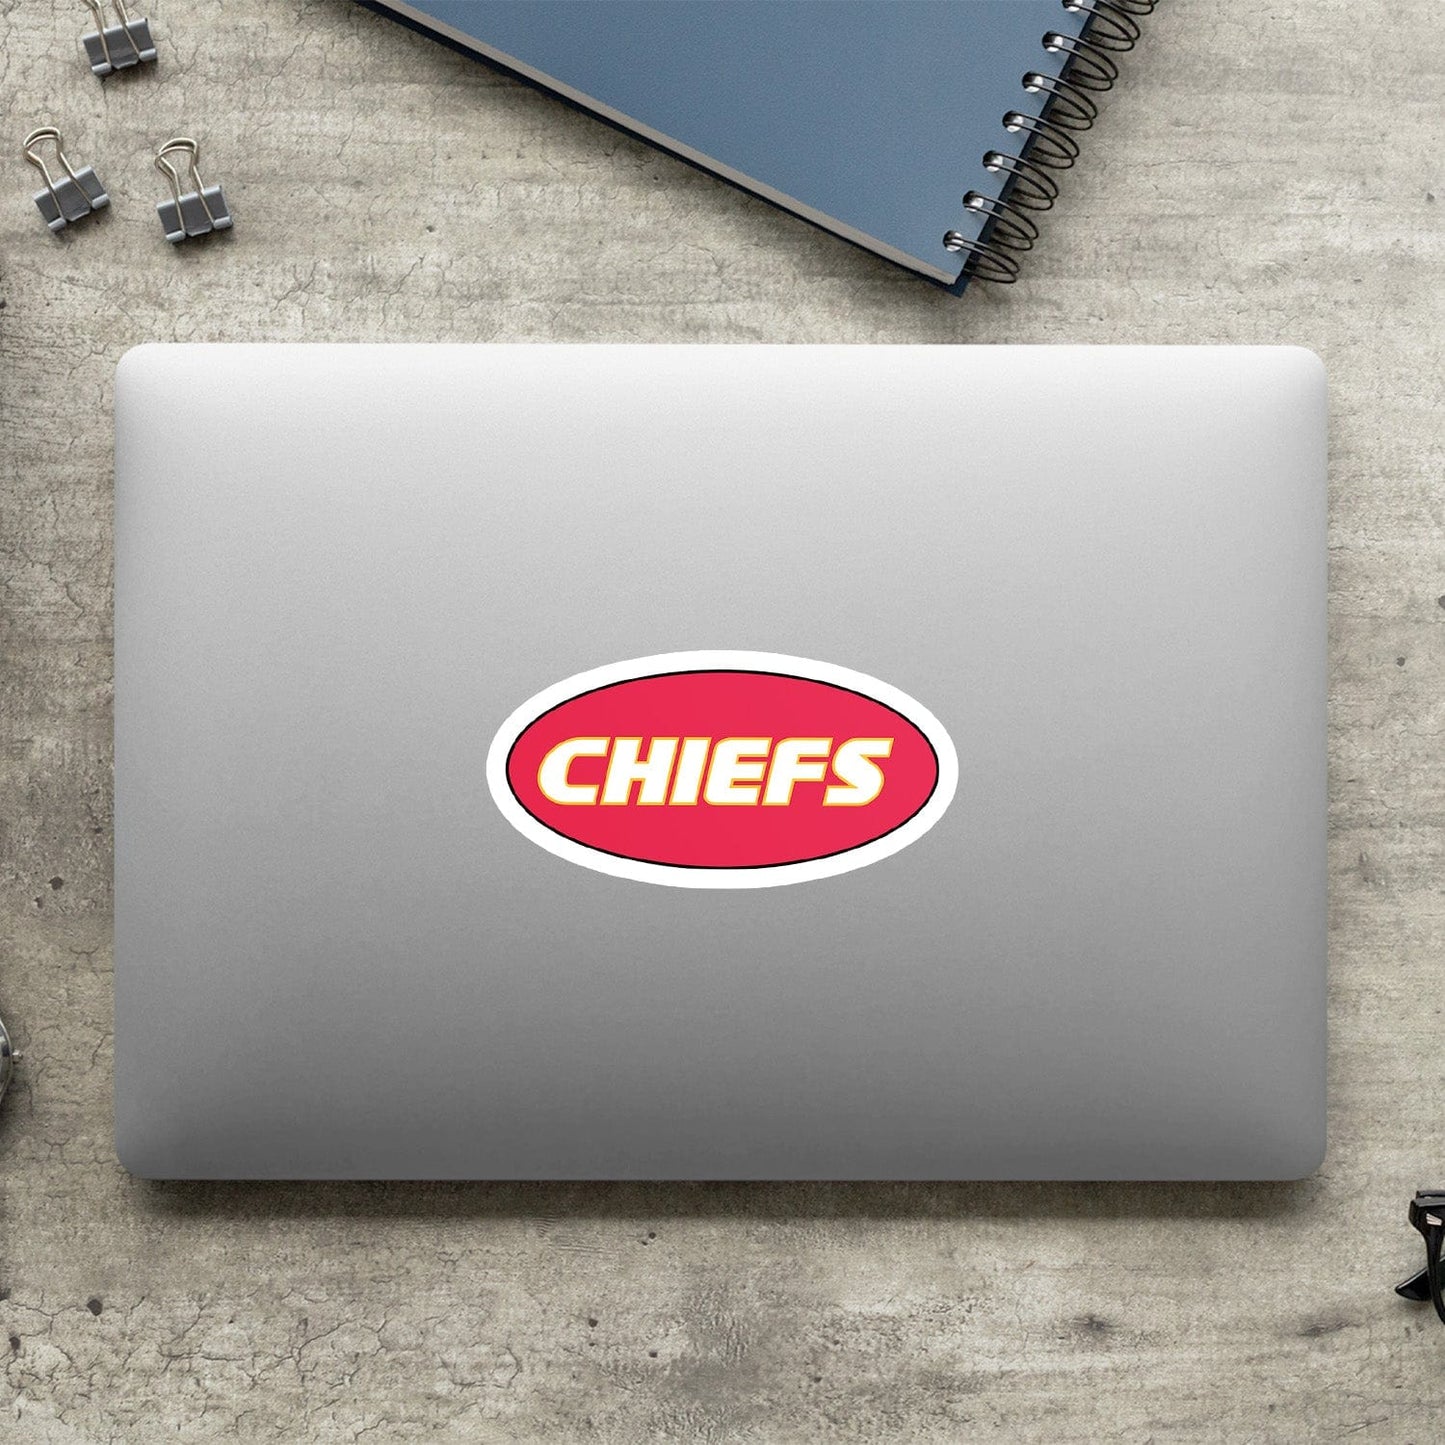 KC Swag Kansas City Chiefs red, yellow CHIEFS CLASSIC OVAL vinyl die cut decal sticker on closed laptop back